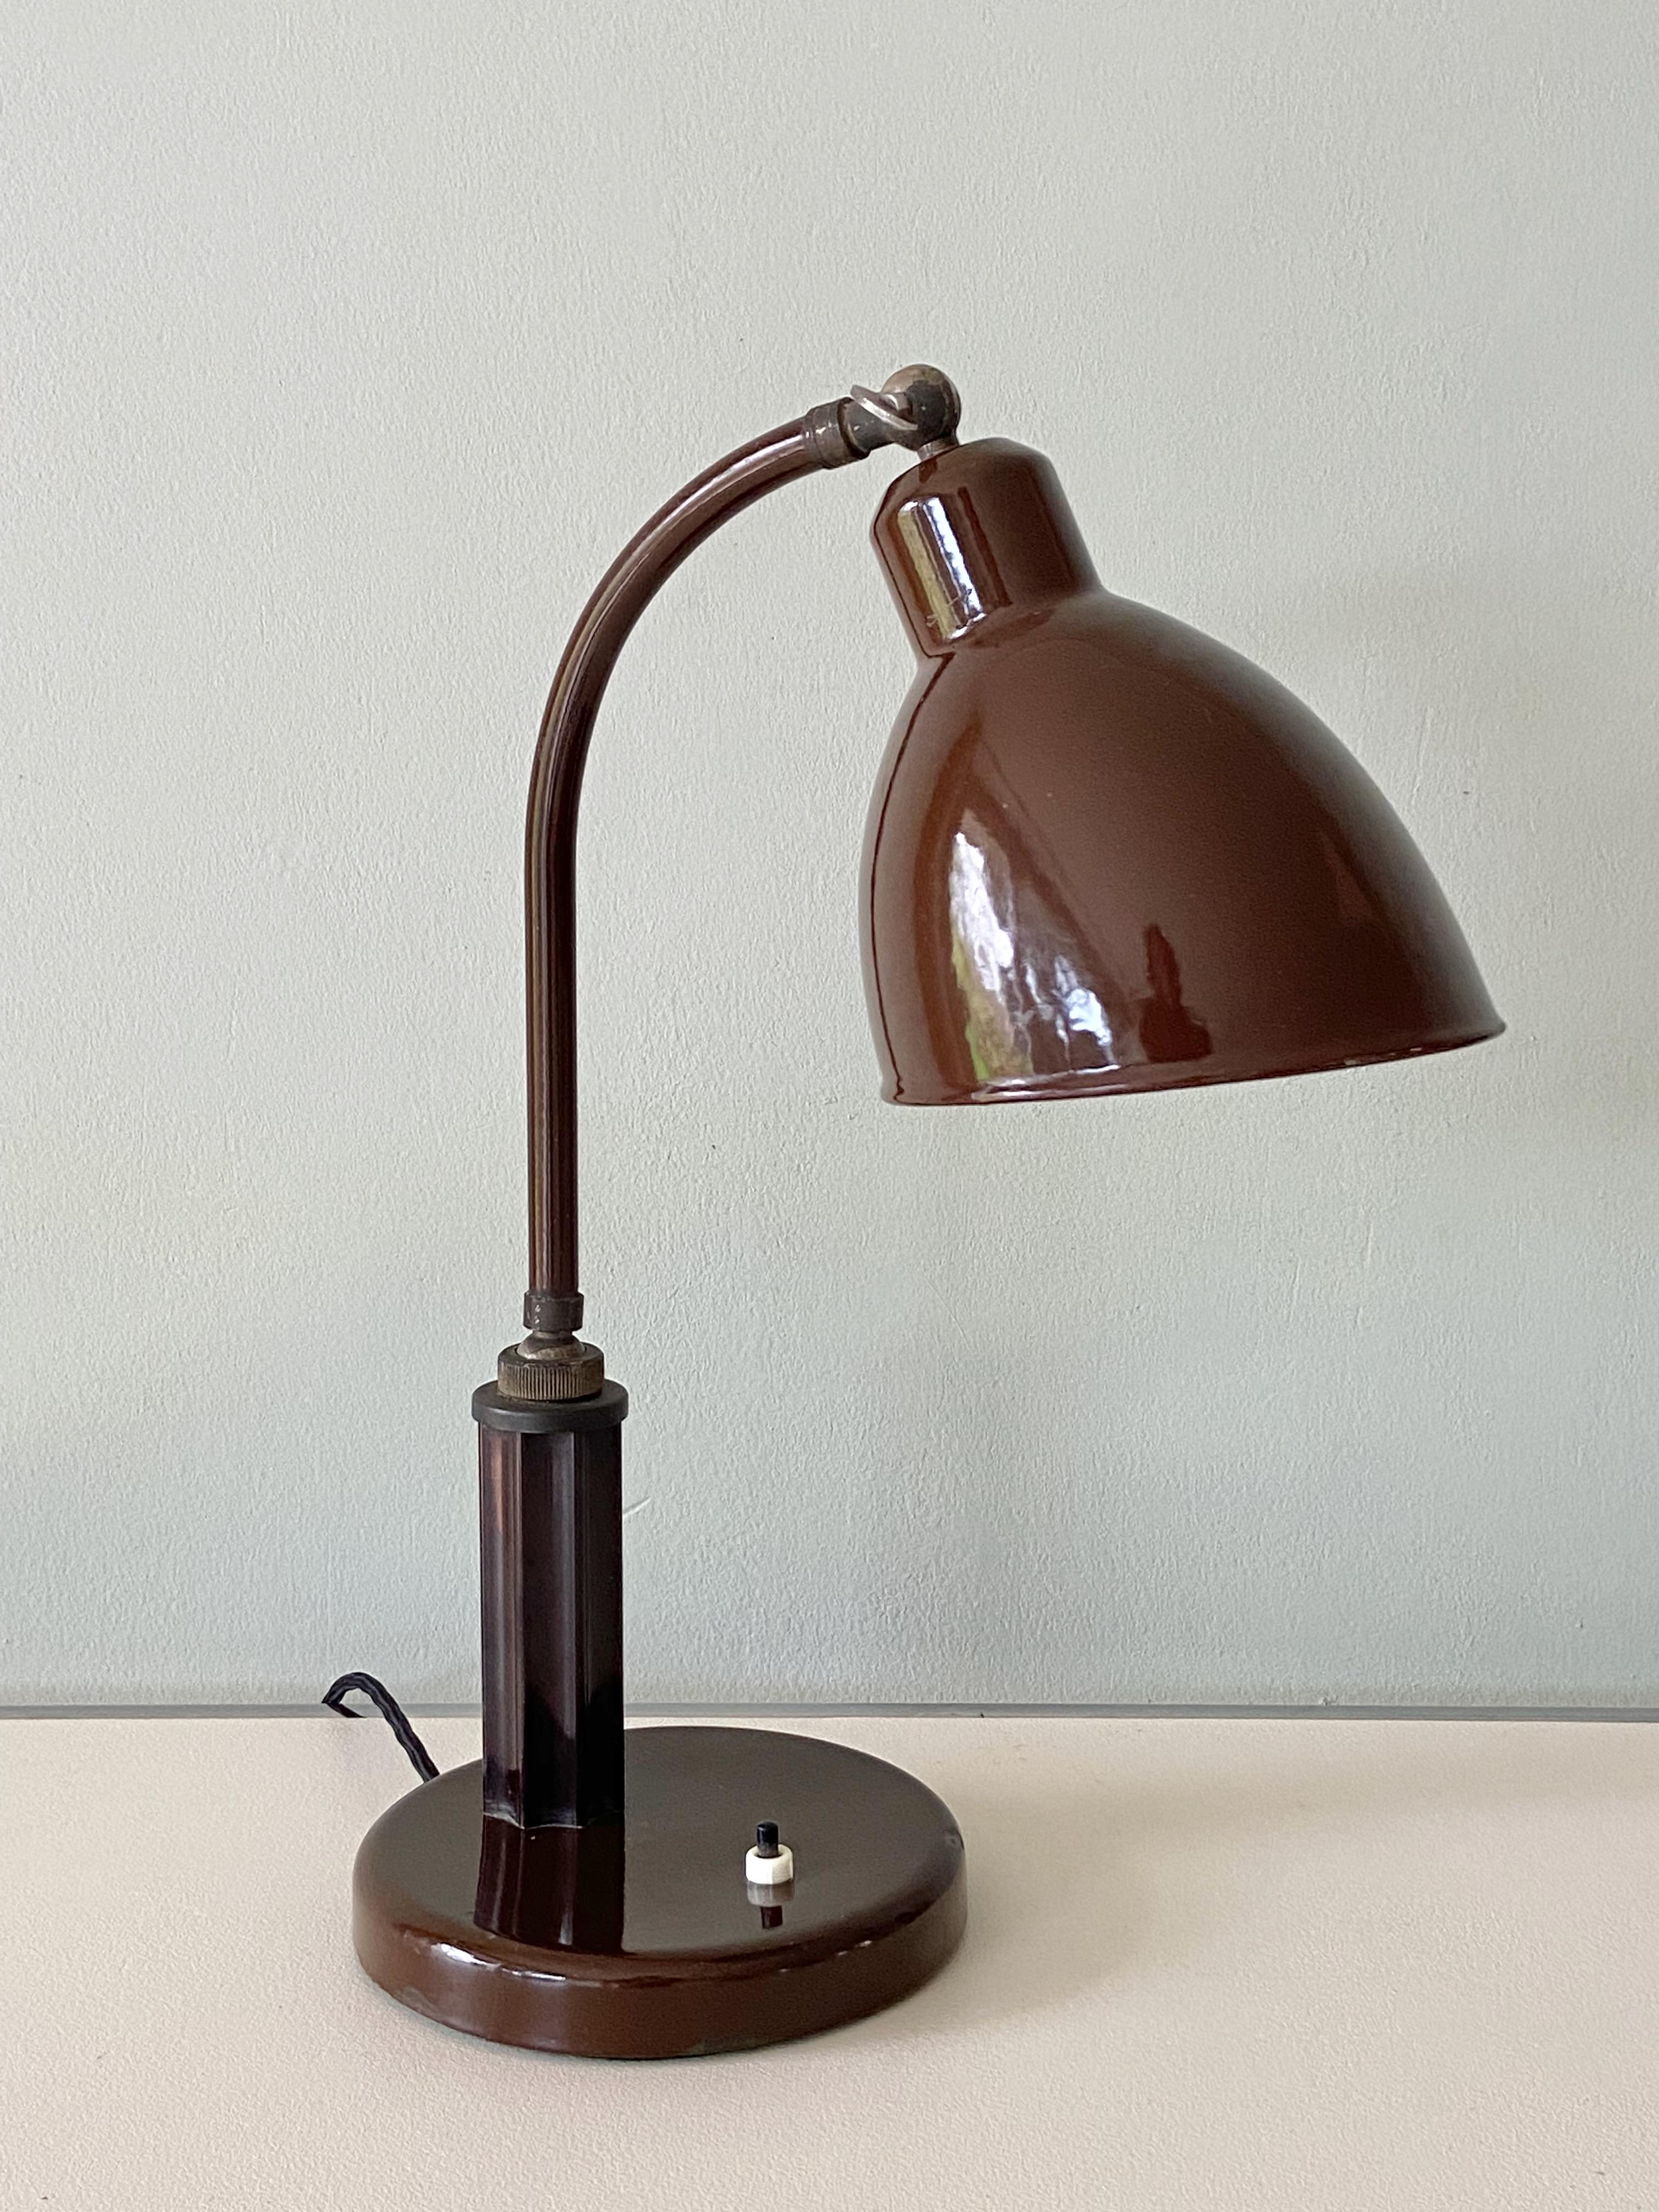 Metal Molitor Grapholux Lamp Brown Enamel and Bakelite Stick by Christian Dell 1930s For Sale